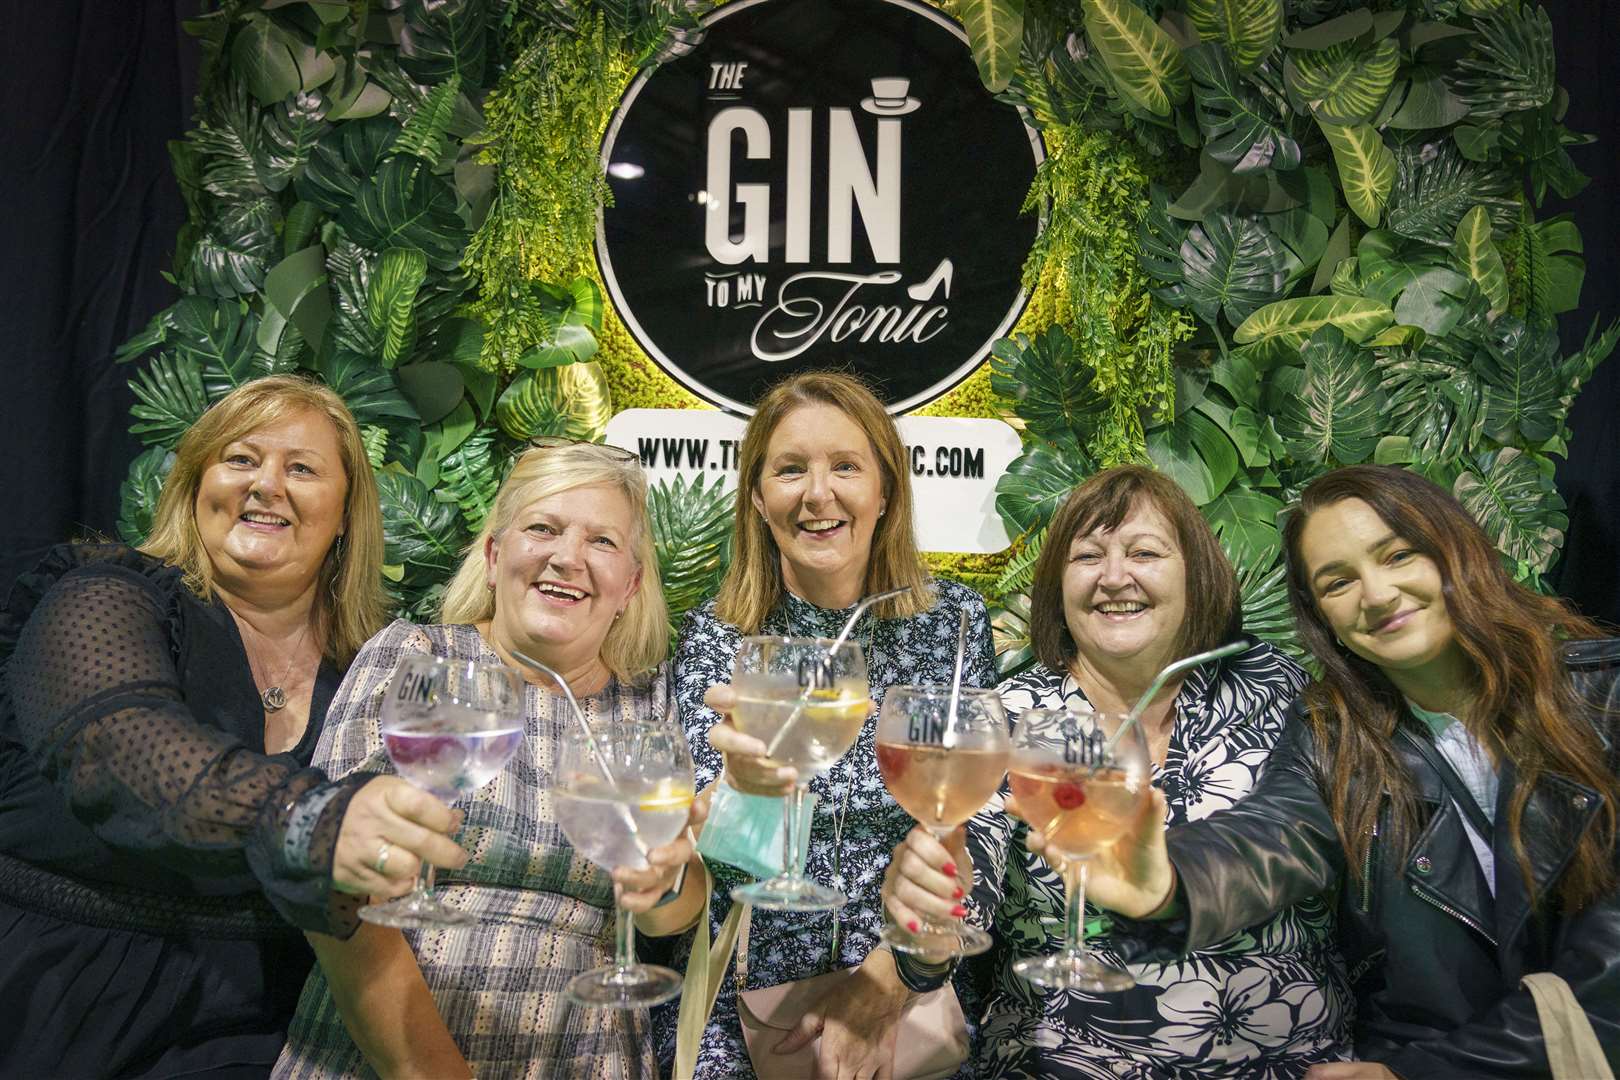 The Gin To My Tonic event heads to Aberdeen next year